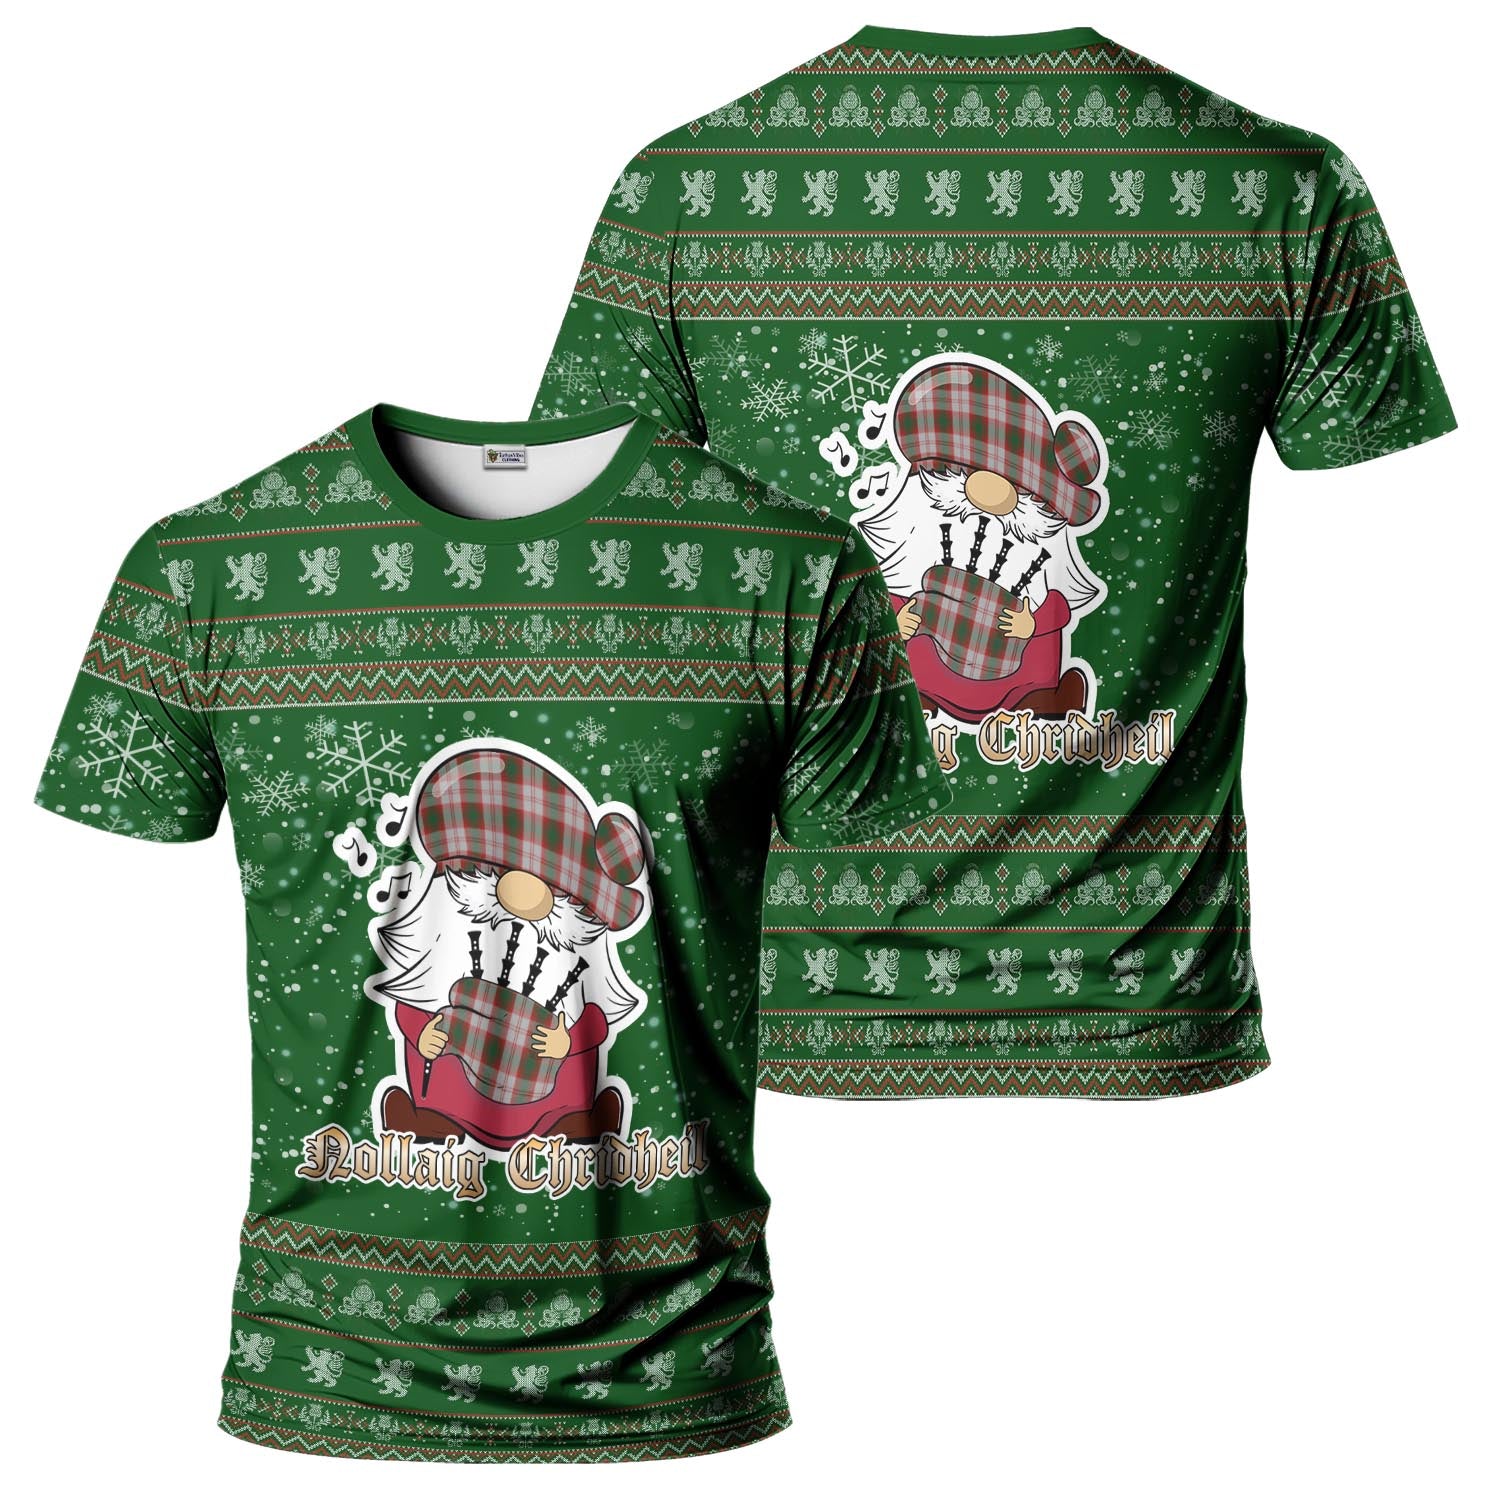 Lindsay Dress Red Clan Christmas Family T-Shirt with Funny Gnome Playing Bagpipes Men's Shirt Green - Tartanvibesclothing